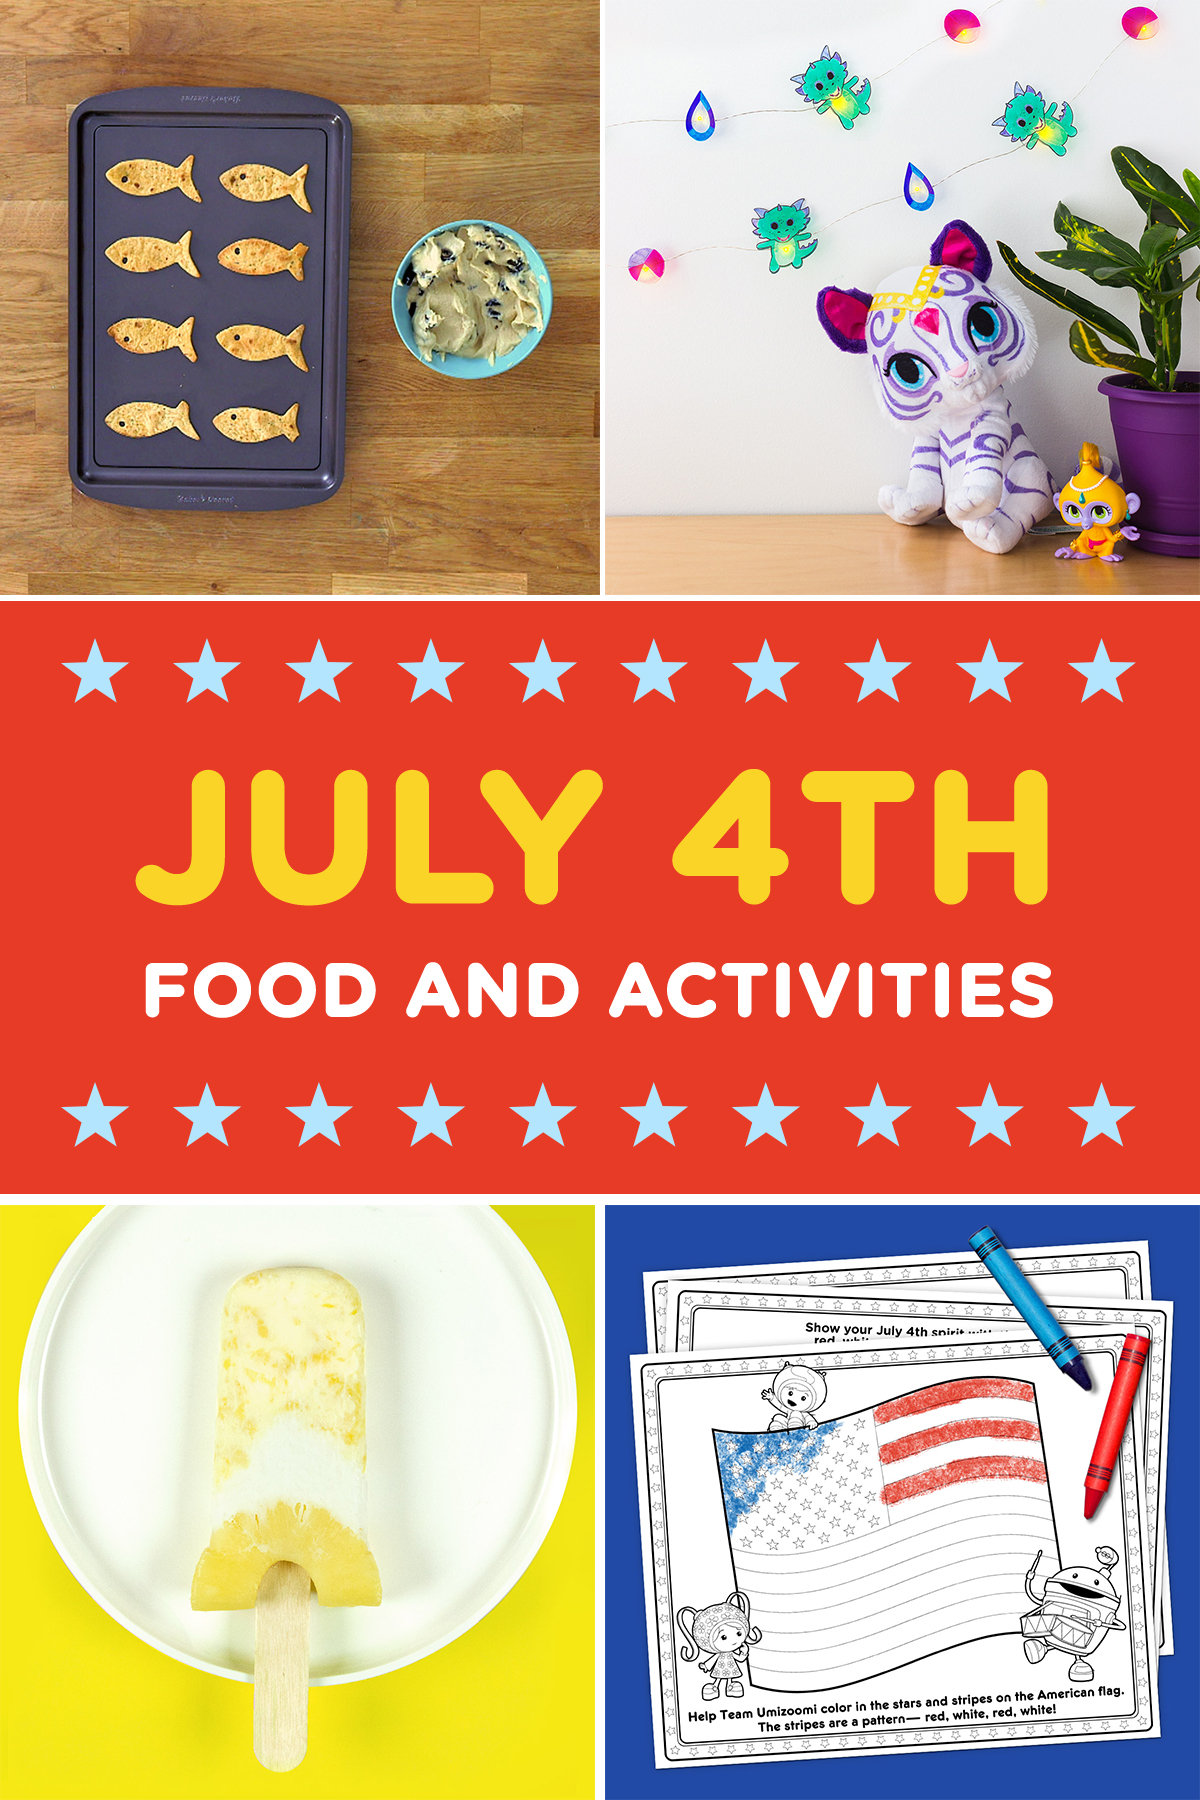 July 4th Activities